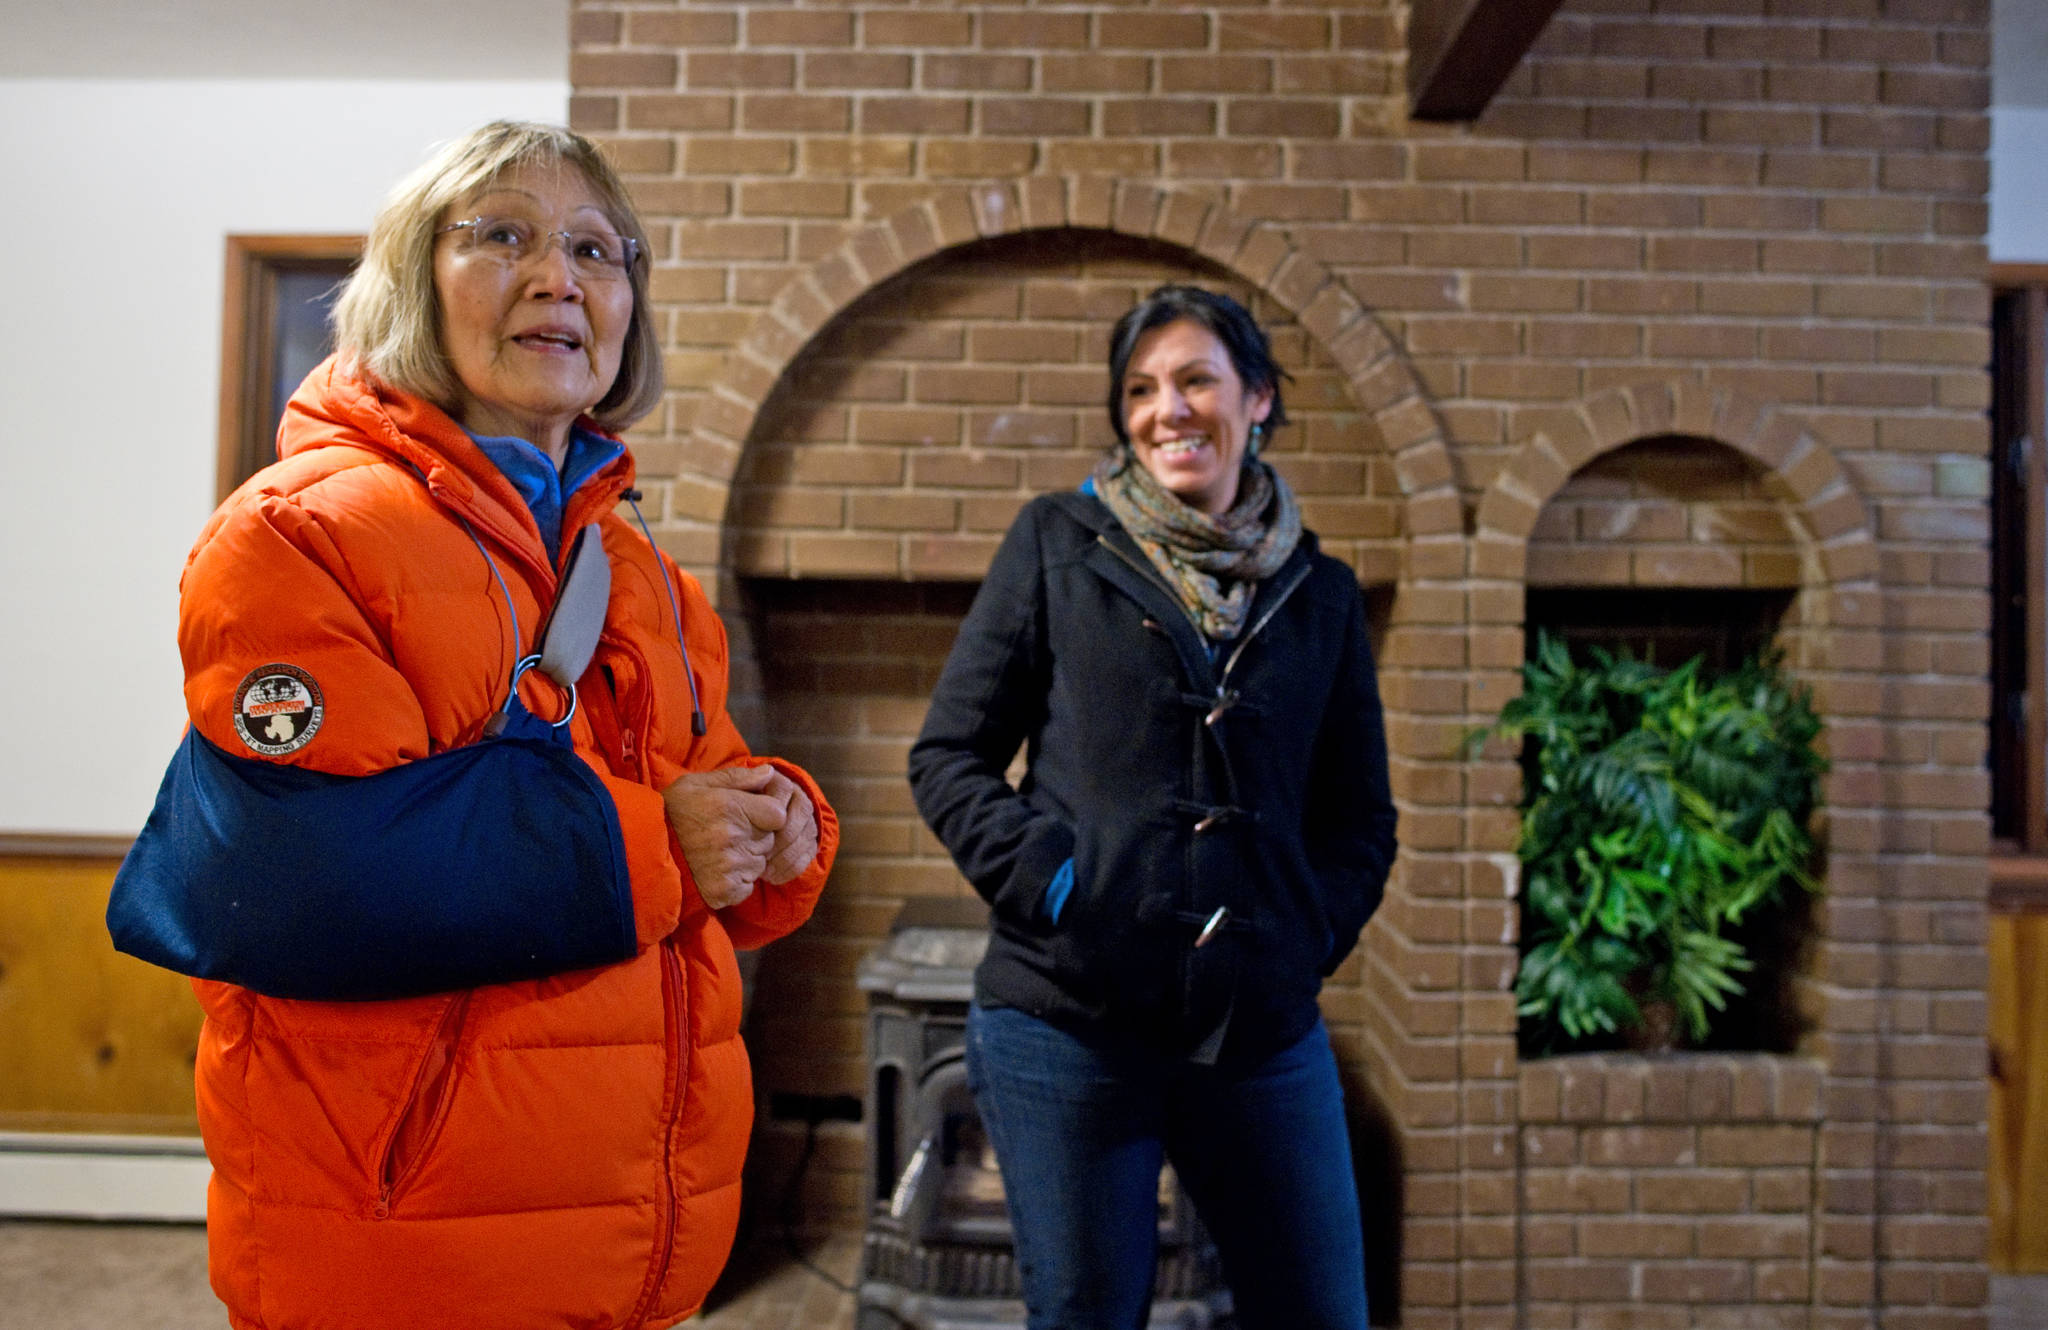 June Degnan and Kara Nelson look around the six-bedroom house their organization, Haven House, aquired on Monday to be used as a halfway house for women being released from prison. They expect to have their first occupants by March.